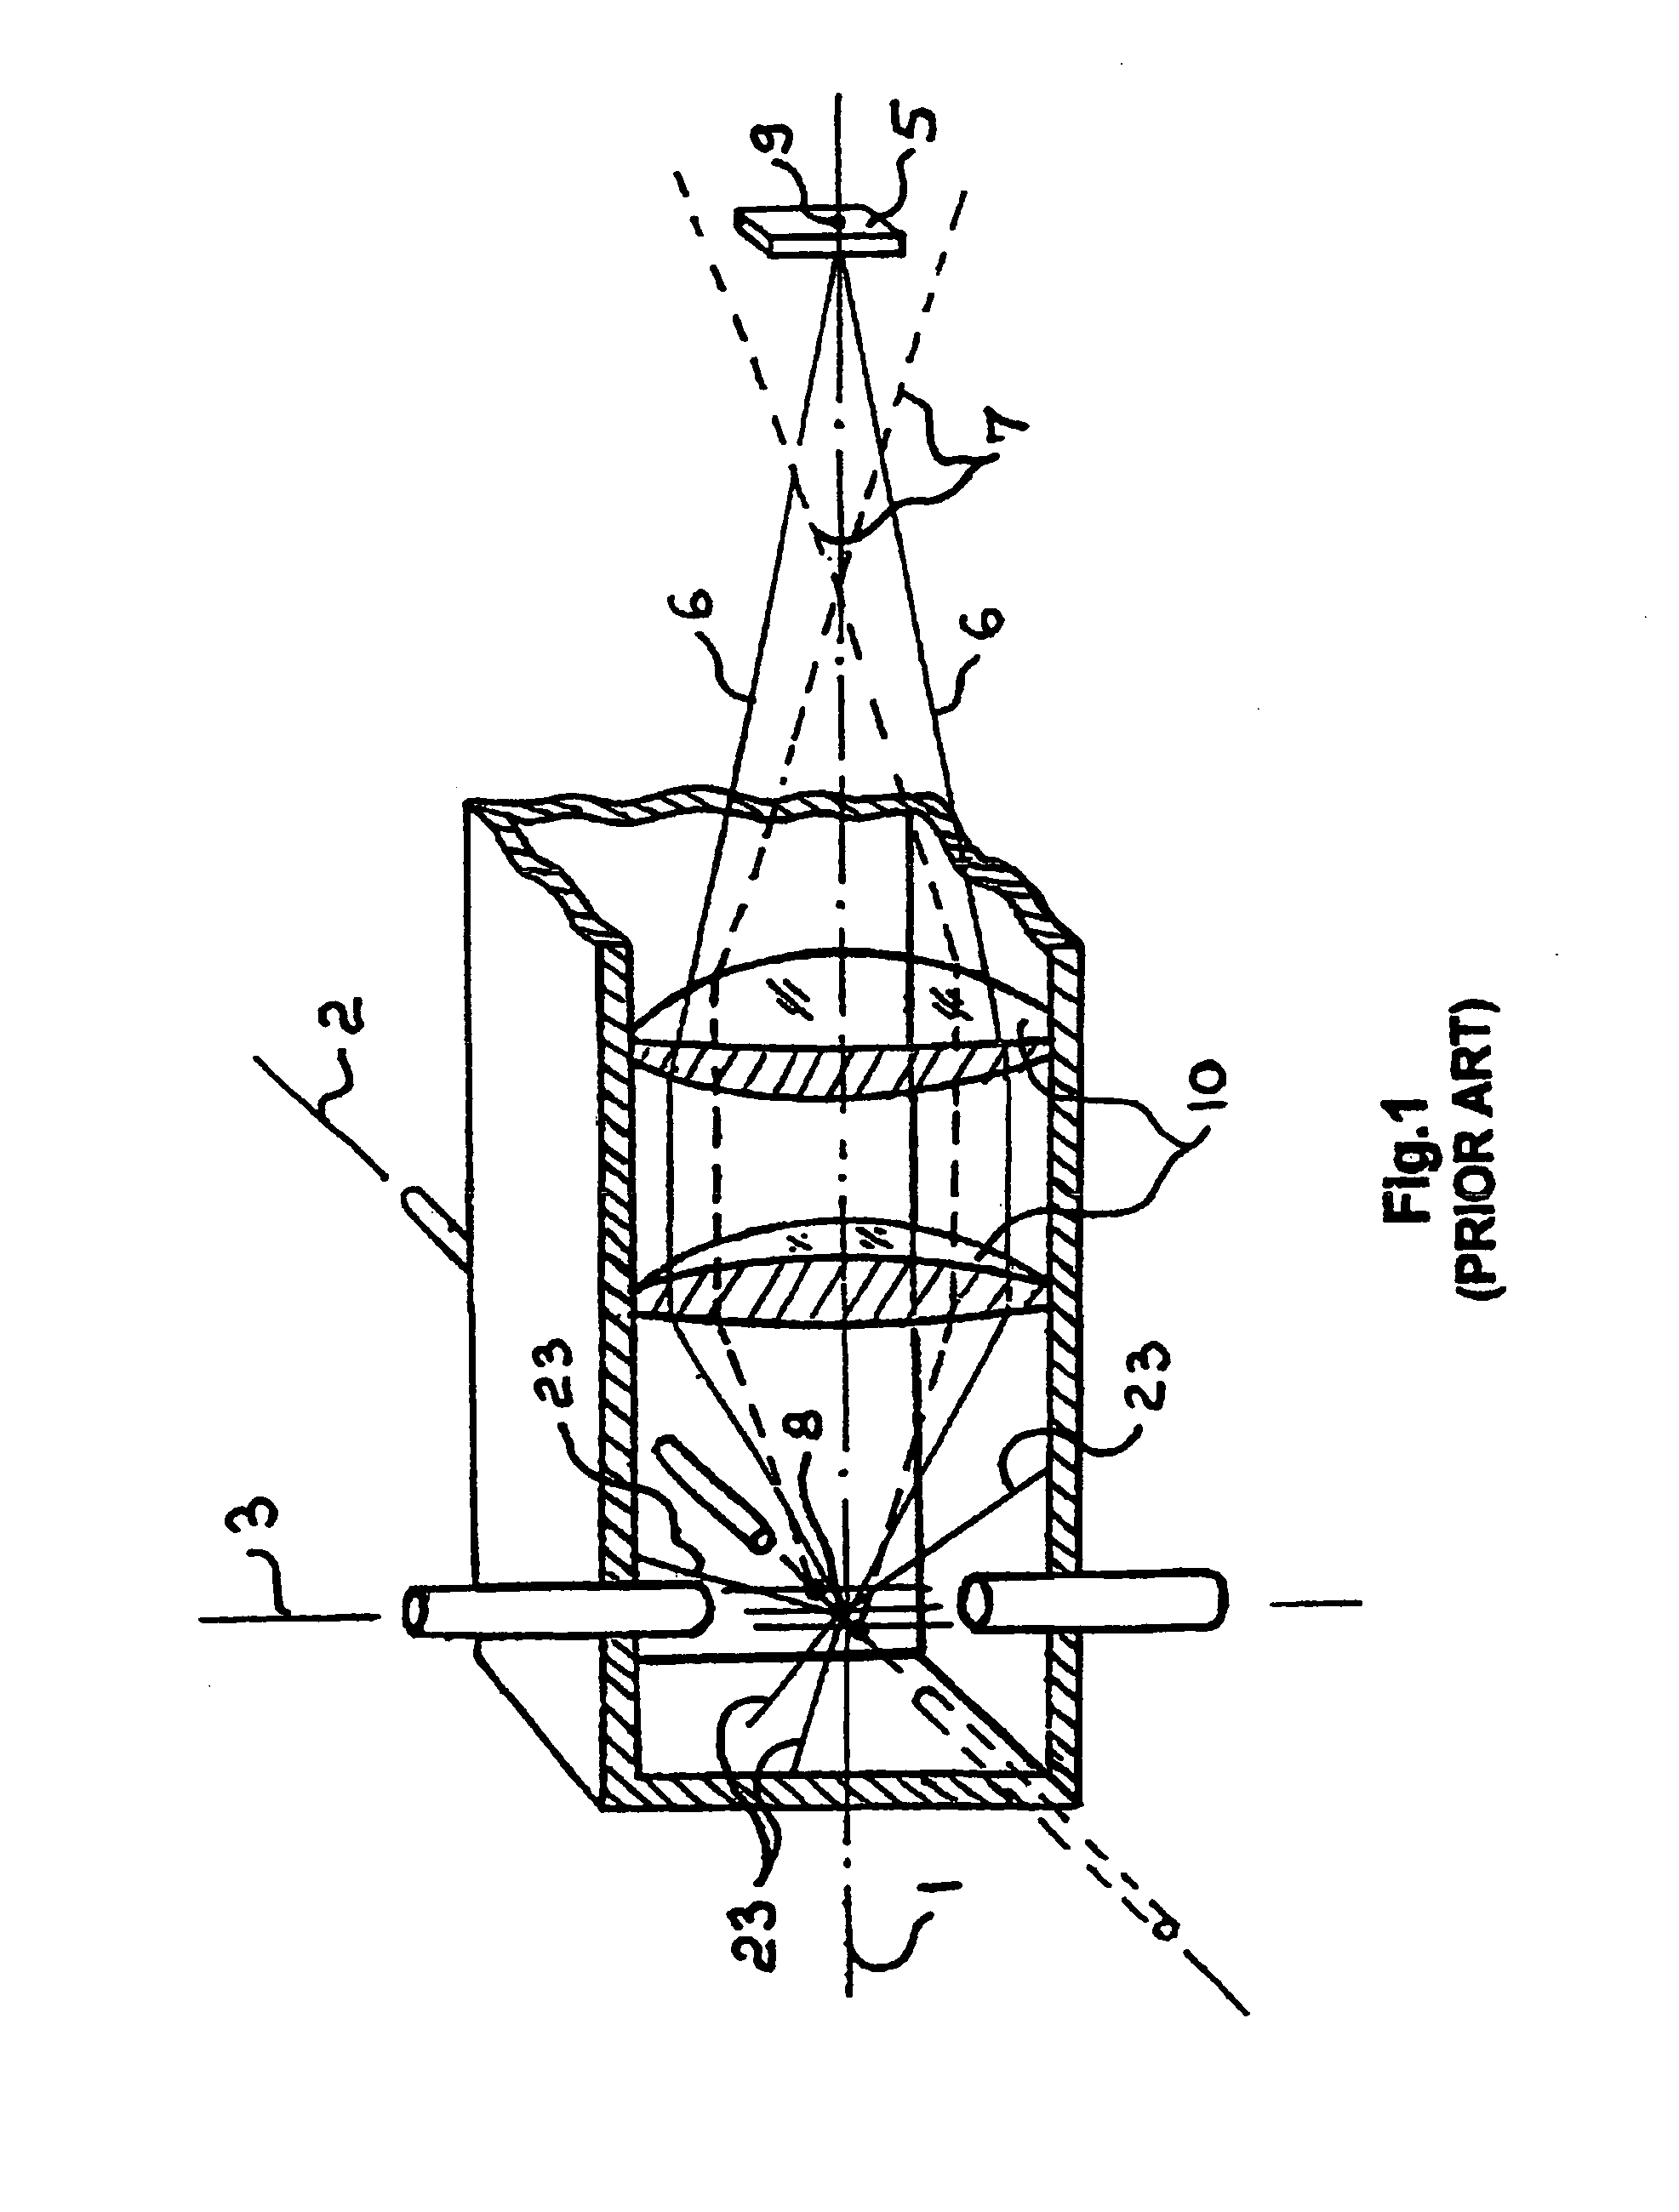 Methods and apparatus for biomedical agent multi-dimension measuring and analysis